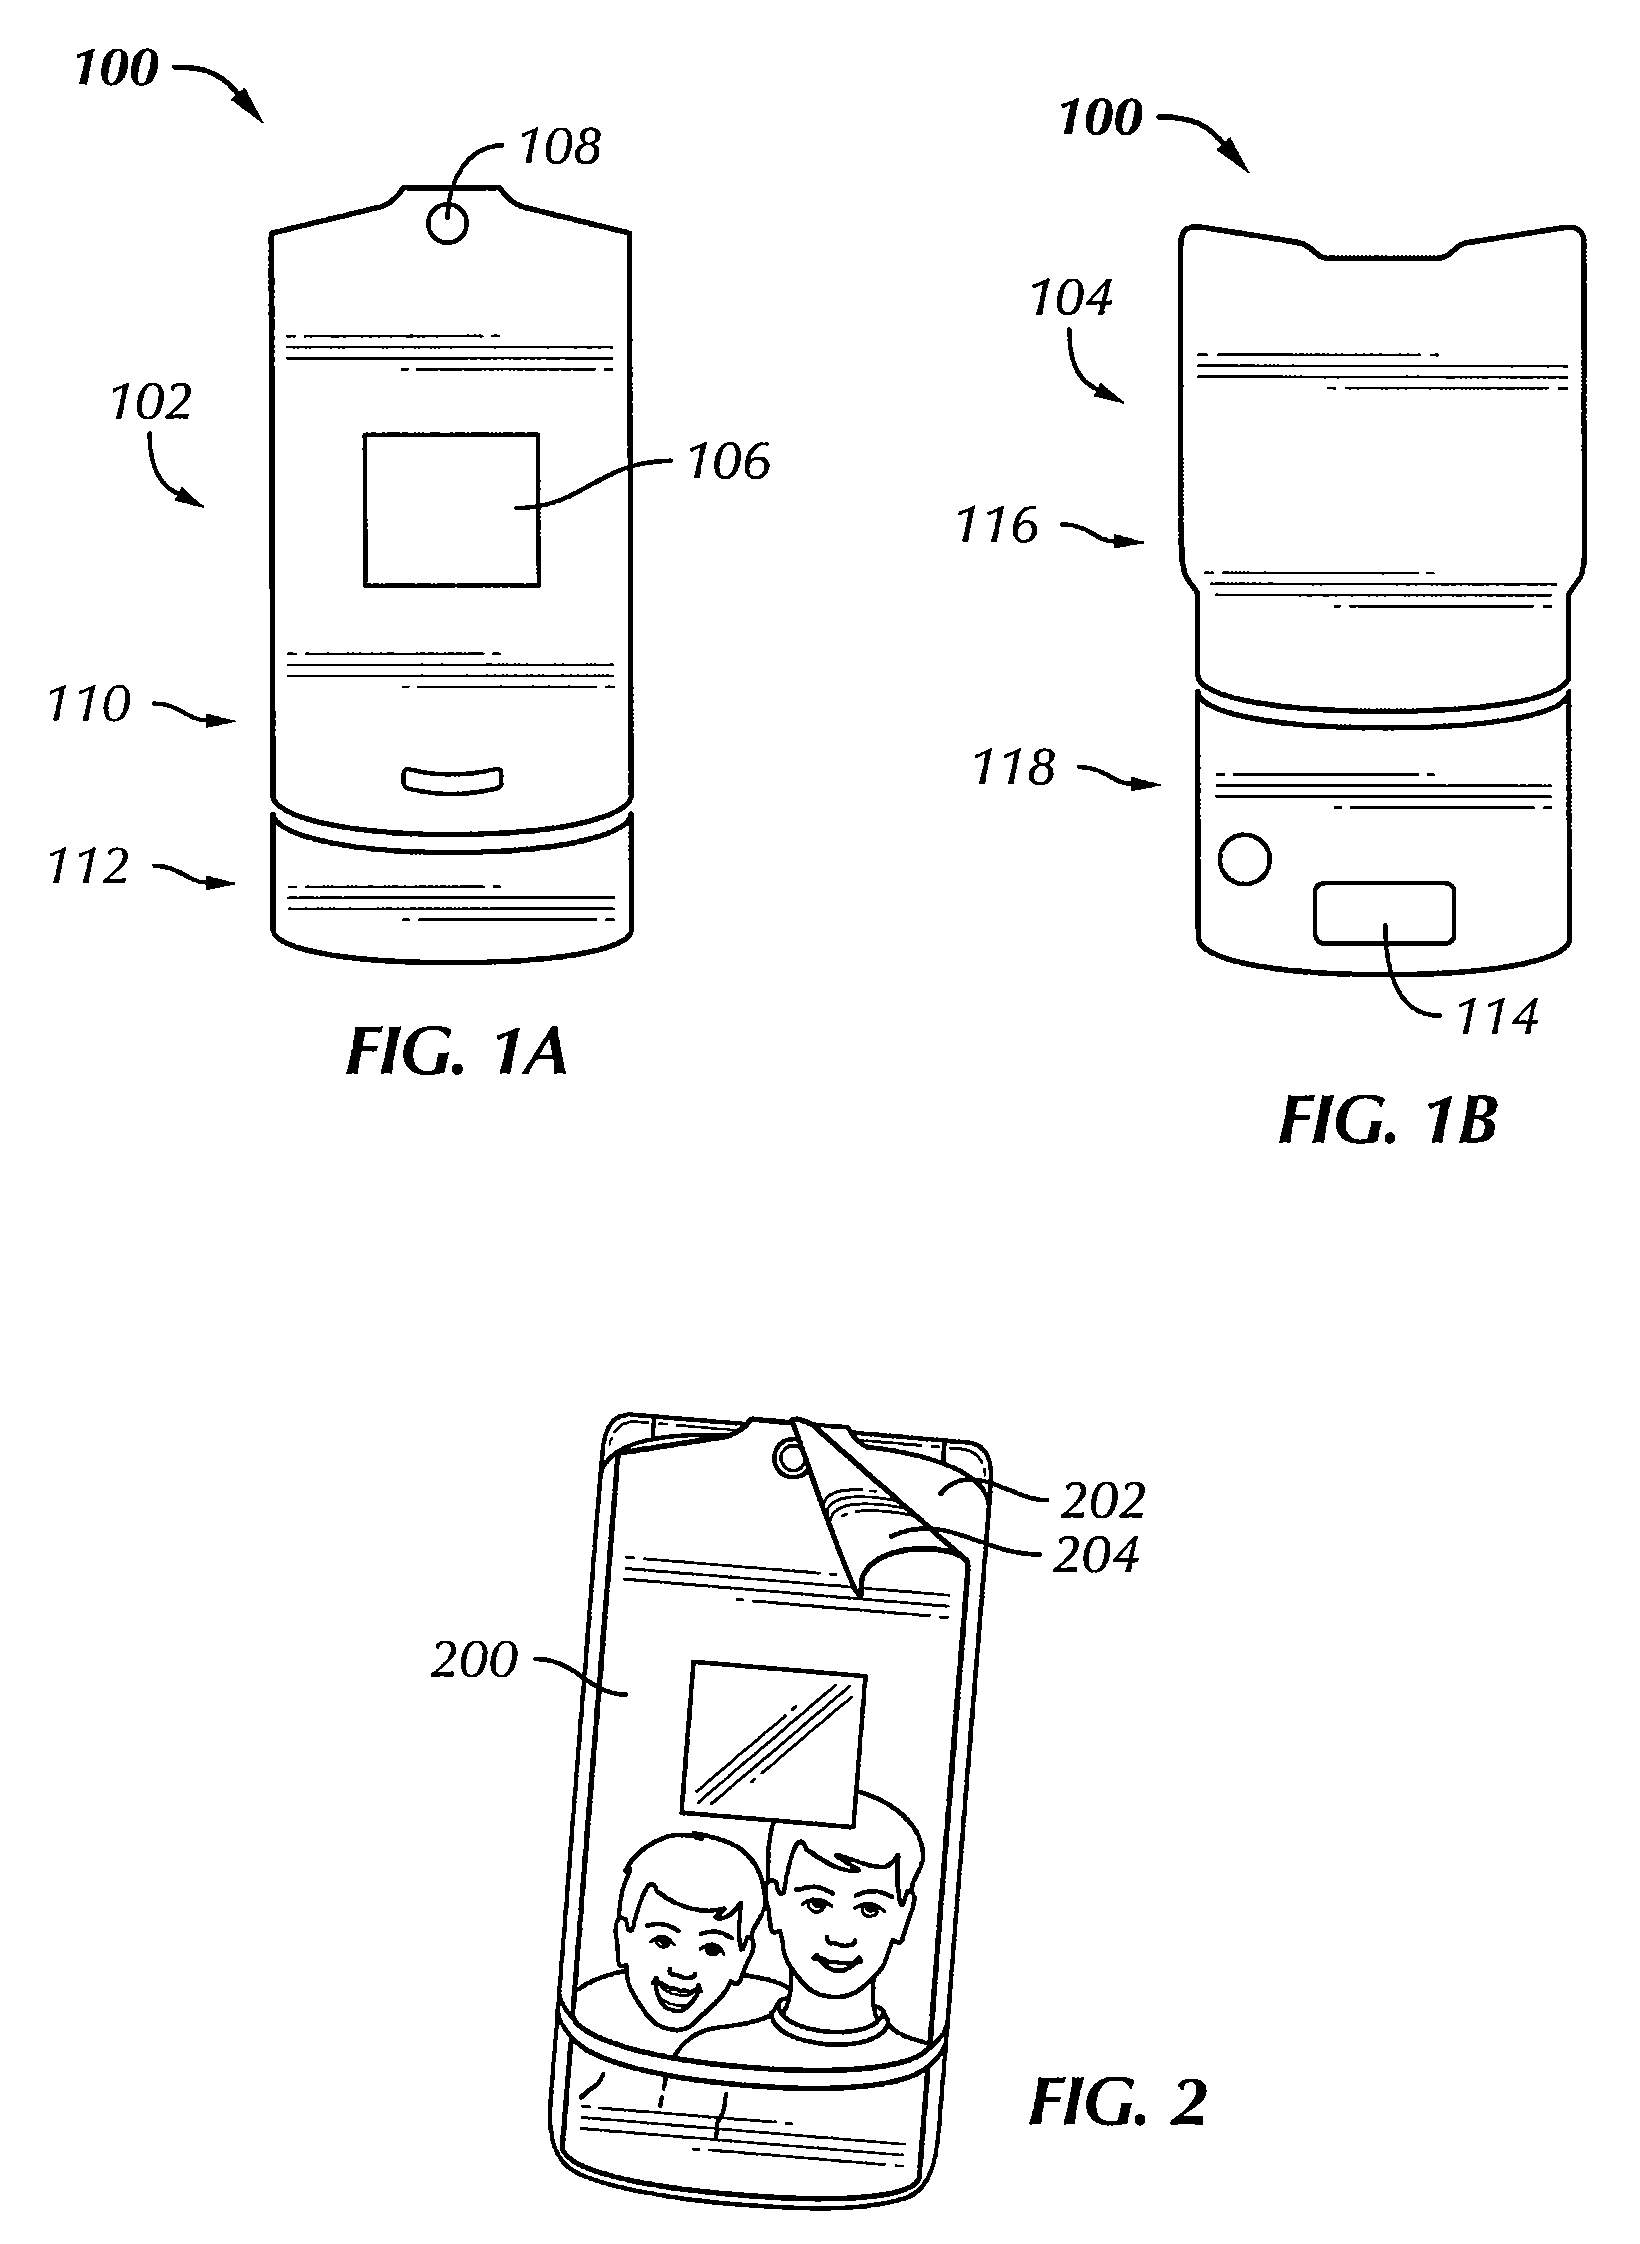 Adhesive cover for consumer devices